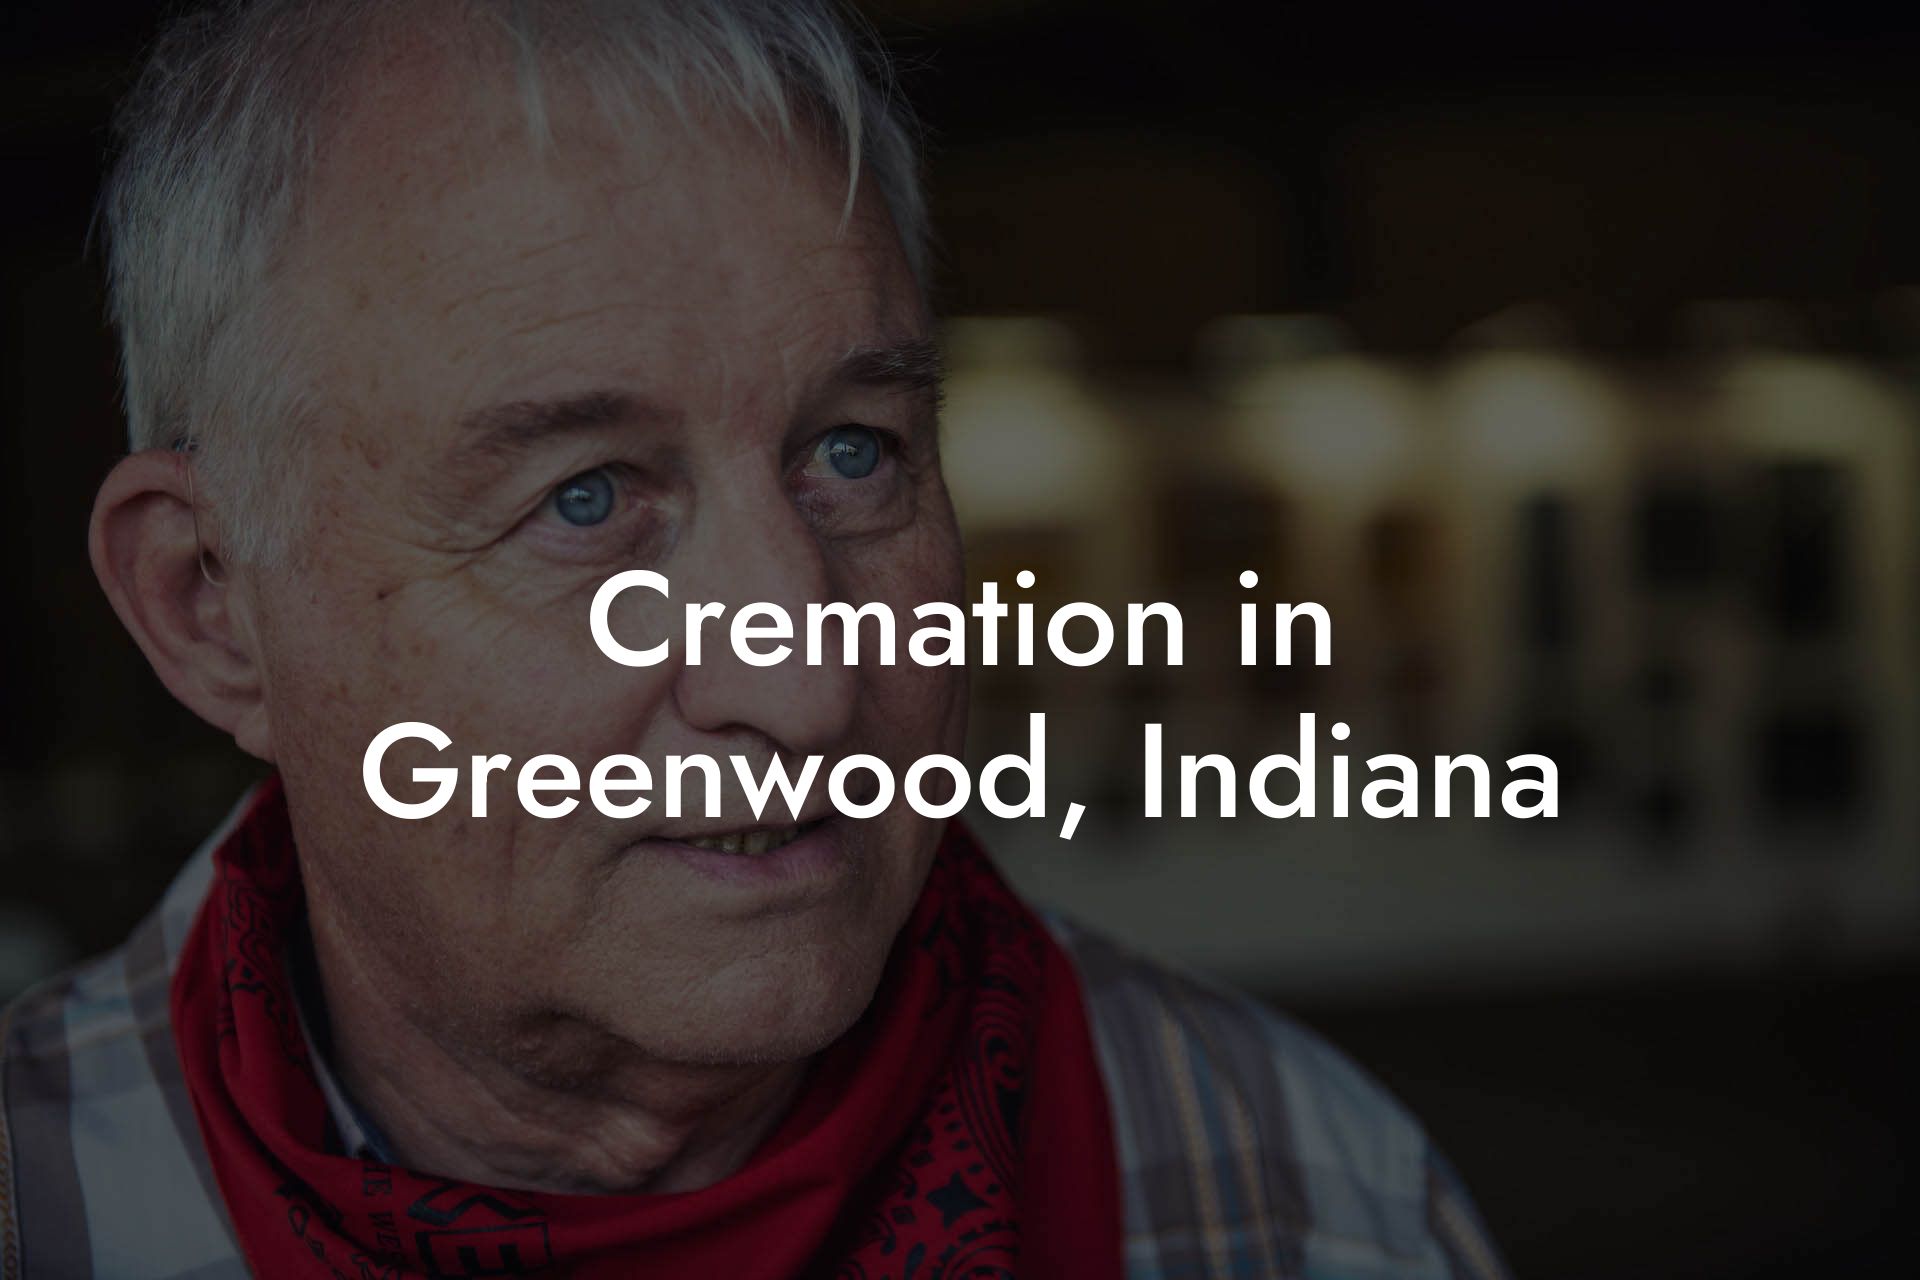 Cremation in Greenwood, Indiana